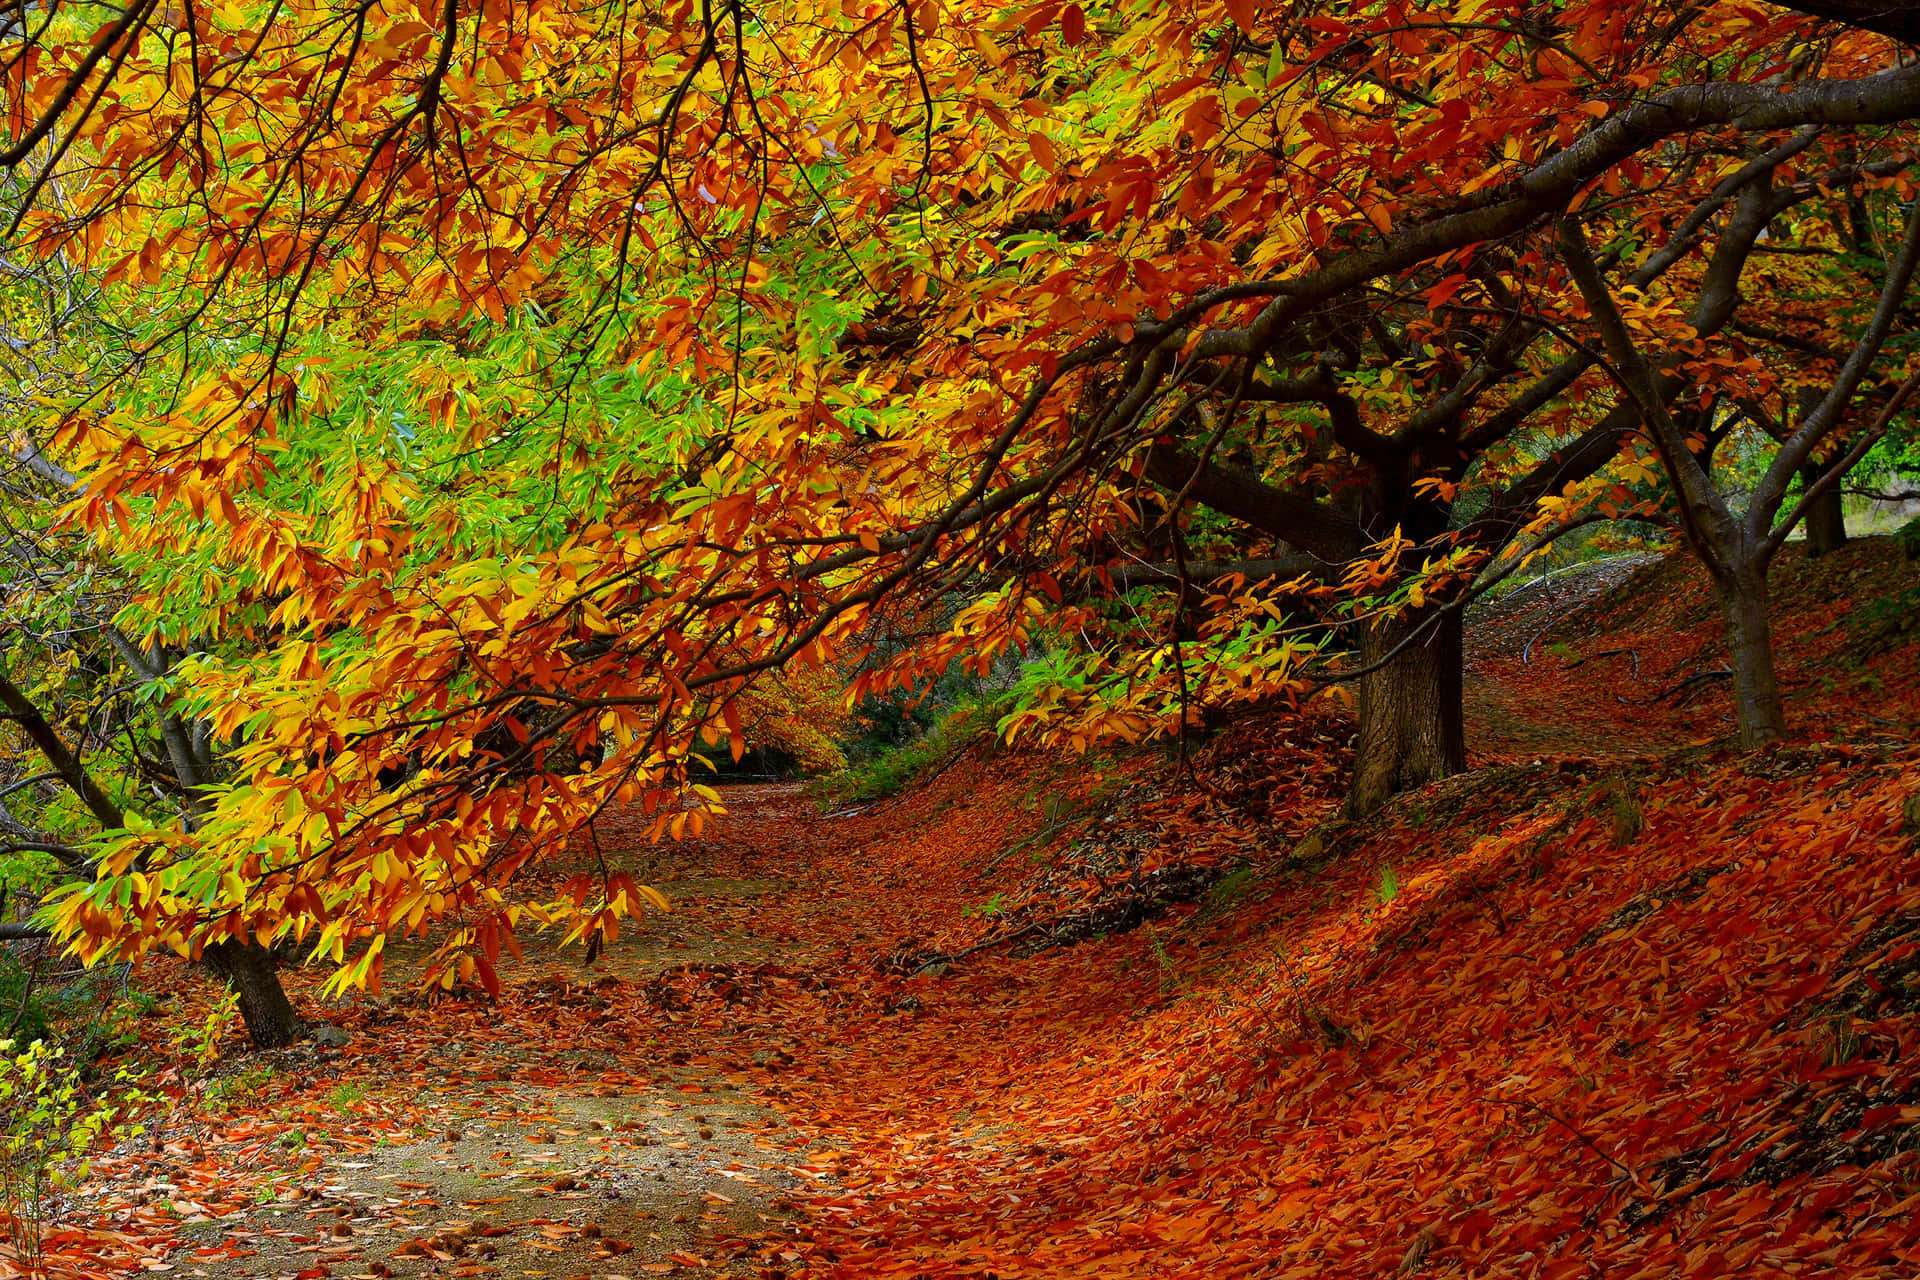 Capturing a beautiful glimpse of autumn foliage in its full red, yellow, and orange glory. Wallpaper